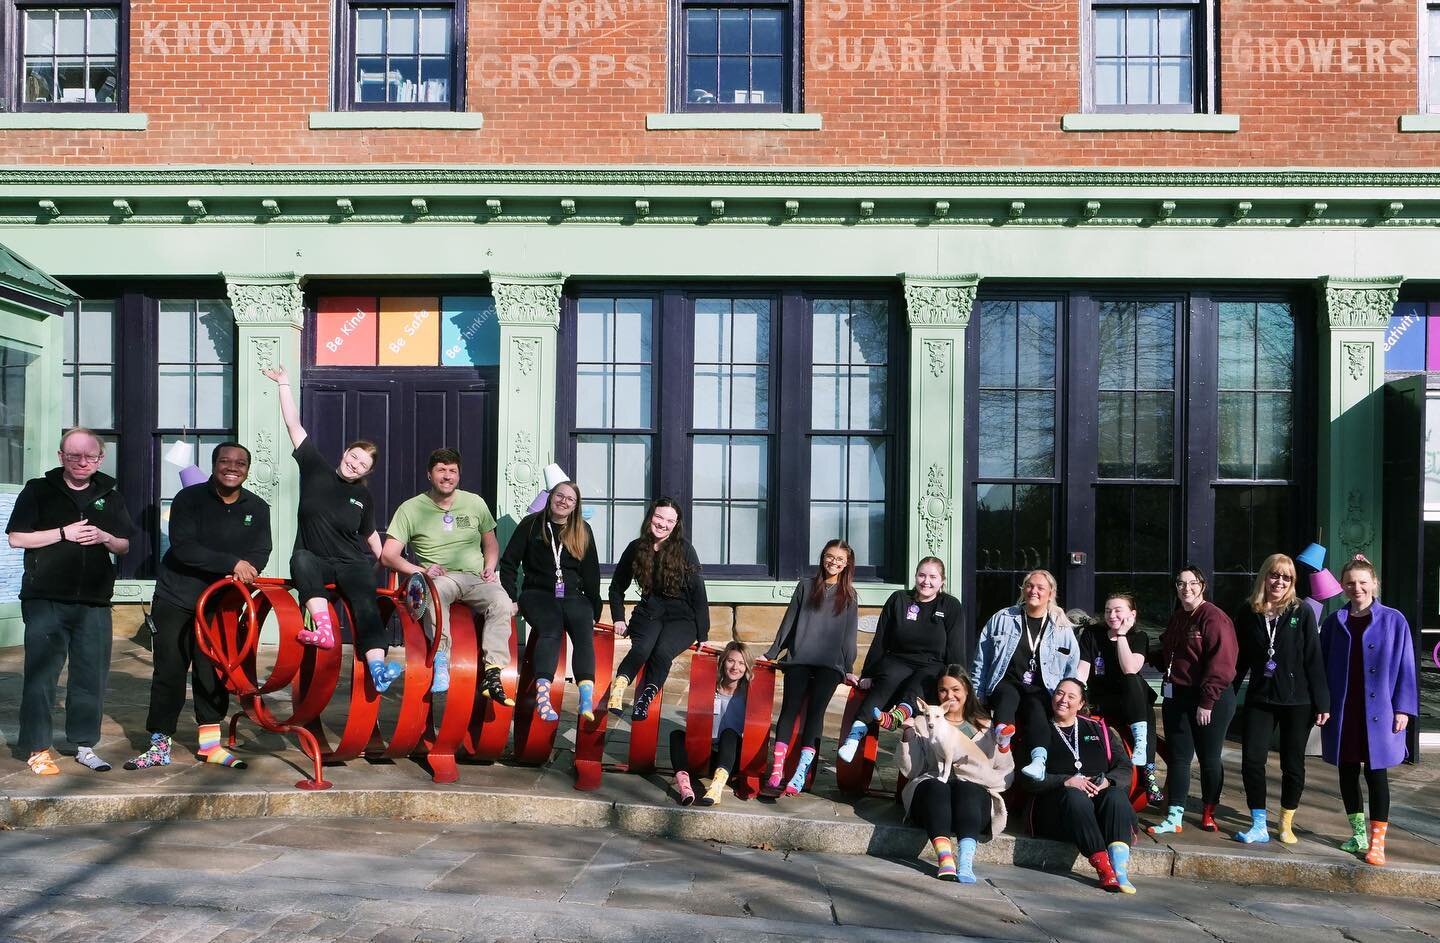 Amazement Square is celebrating World Down Syndrome Day! Wear your silly socks to the museum and donate to the Puzzled Foundation, which supports children with autism and special needs in Lynchburg and beyond! #worlddownsyndromeday #lotsofsocks